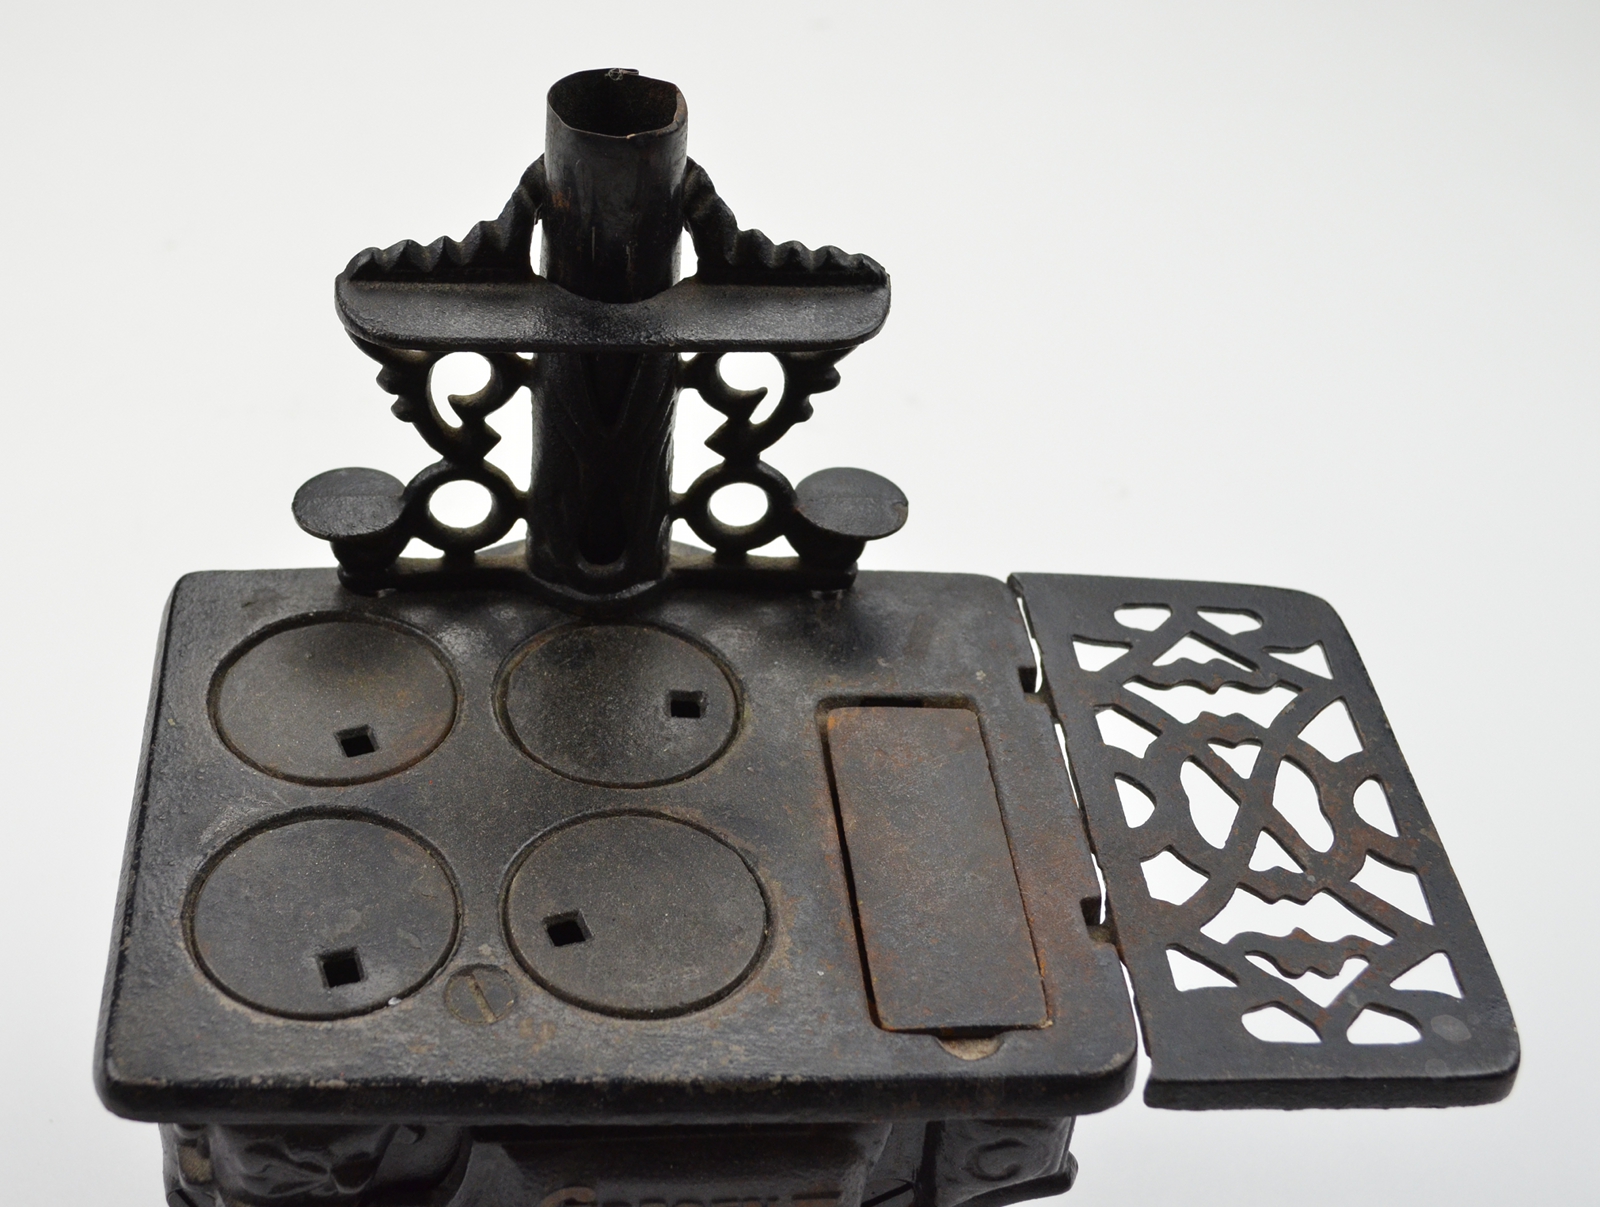 Crescent Cast Iron Wood Burning Stove With Accessories - Salesman Sample